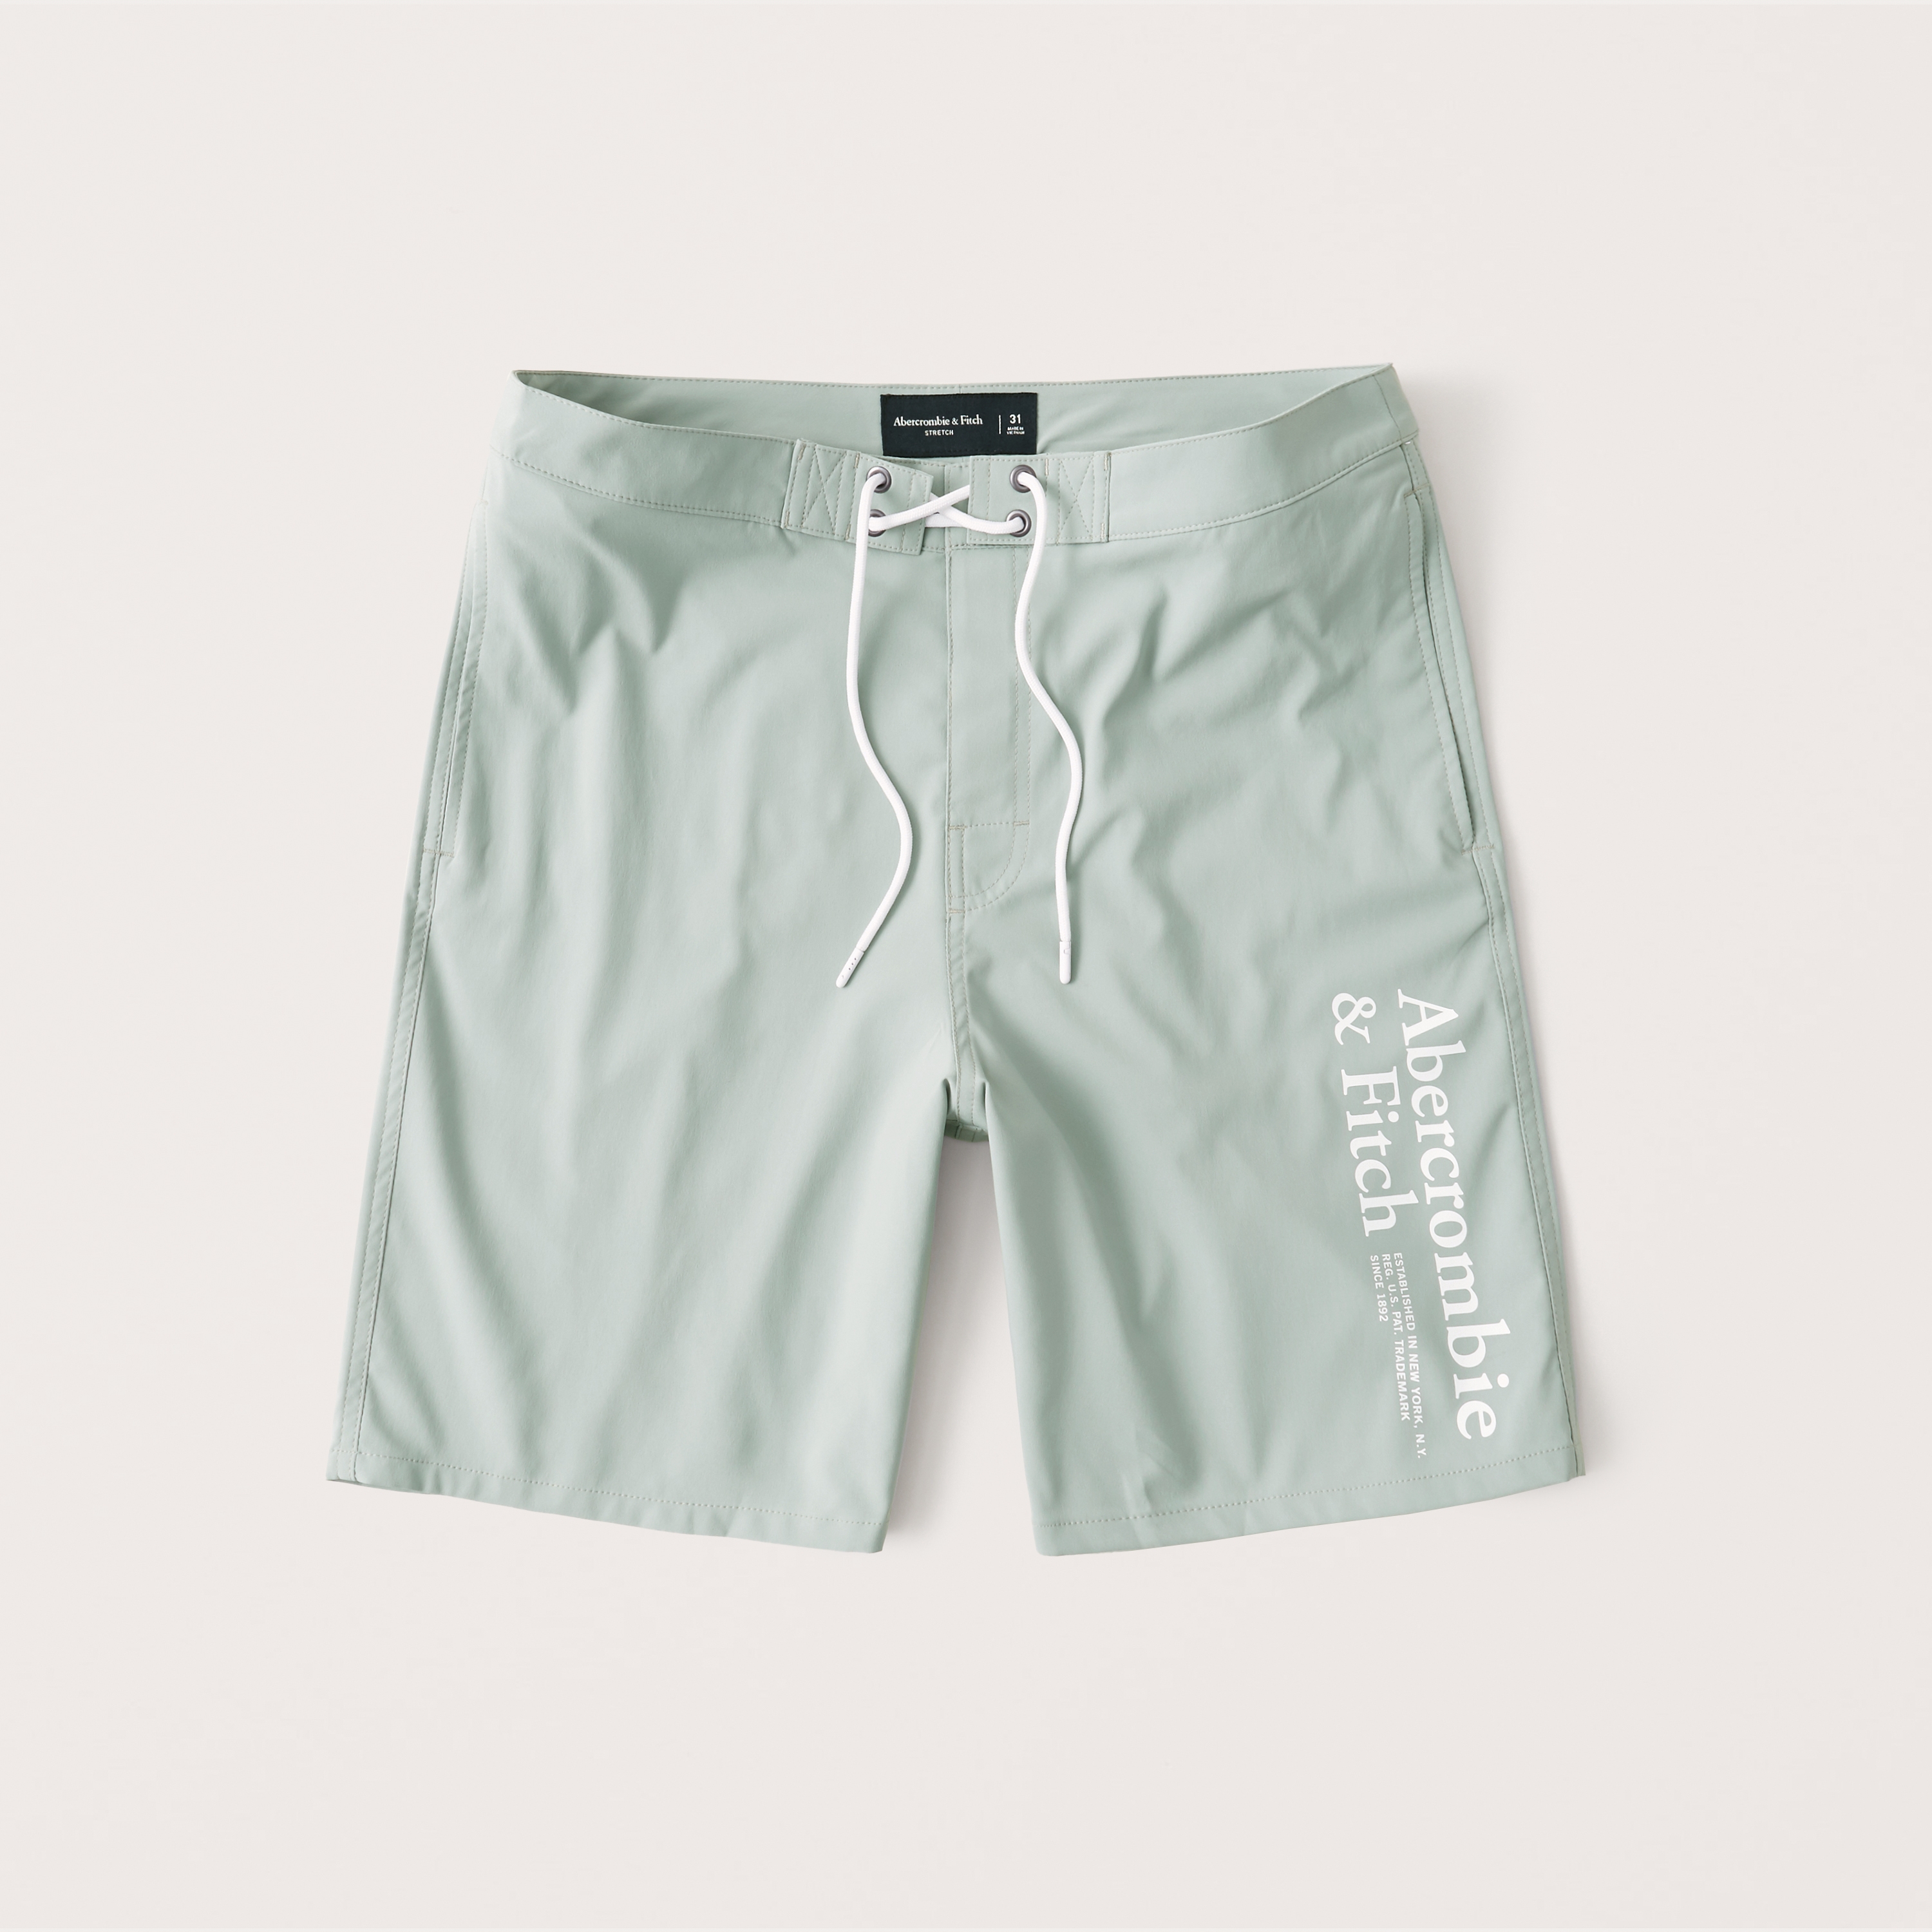 abercrombie and fitch board shorts